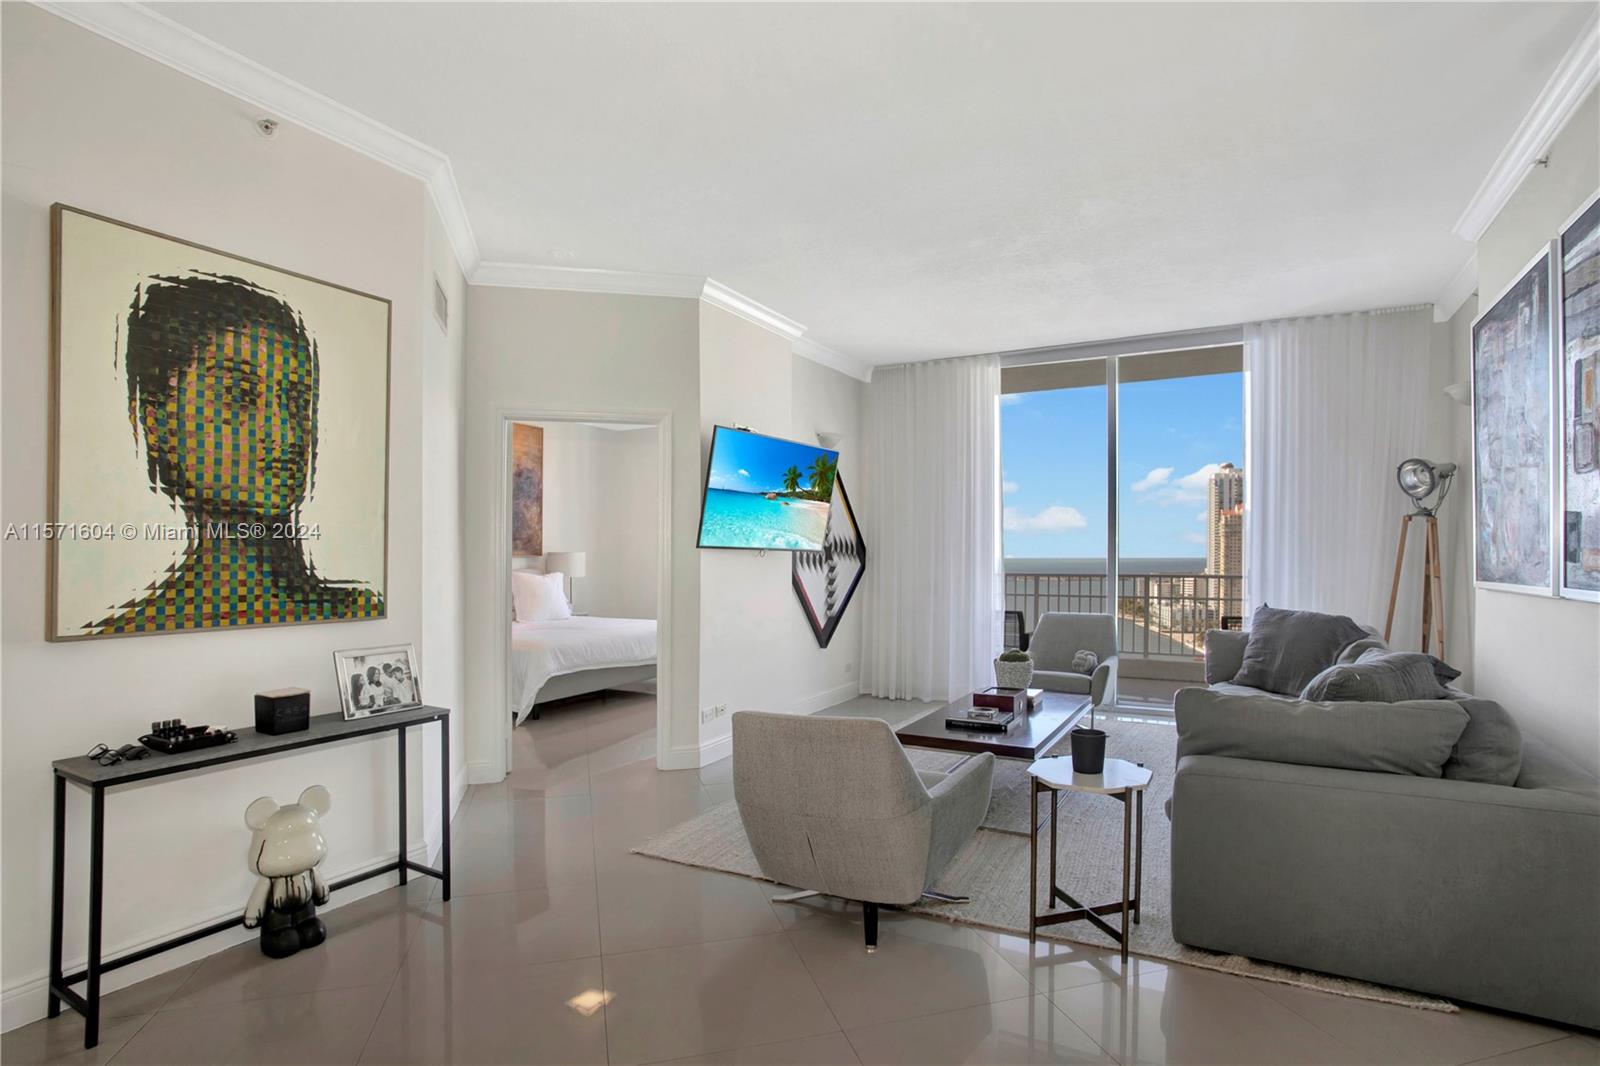 Spectacular Penthouse at Courvoisier Brickell Key. This spacious 3 bed/2.5 bath unit laid out over 1,573 SqFt offers wonderful water, bay & city views. 10-foot ceilings, porcelain flooring throughout, ample kitchen w/ granite countertop and stainless steel appliances, large walk-in closets, 2 parking spaces, 2 storage units. Great building amenities incl heated pool and jacuzzi, 2 story fitness center, racquet / squash court, billiards, media and conference room, shops & restaurants.